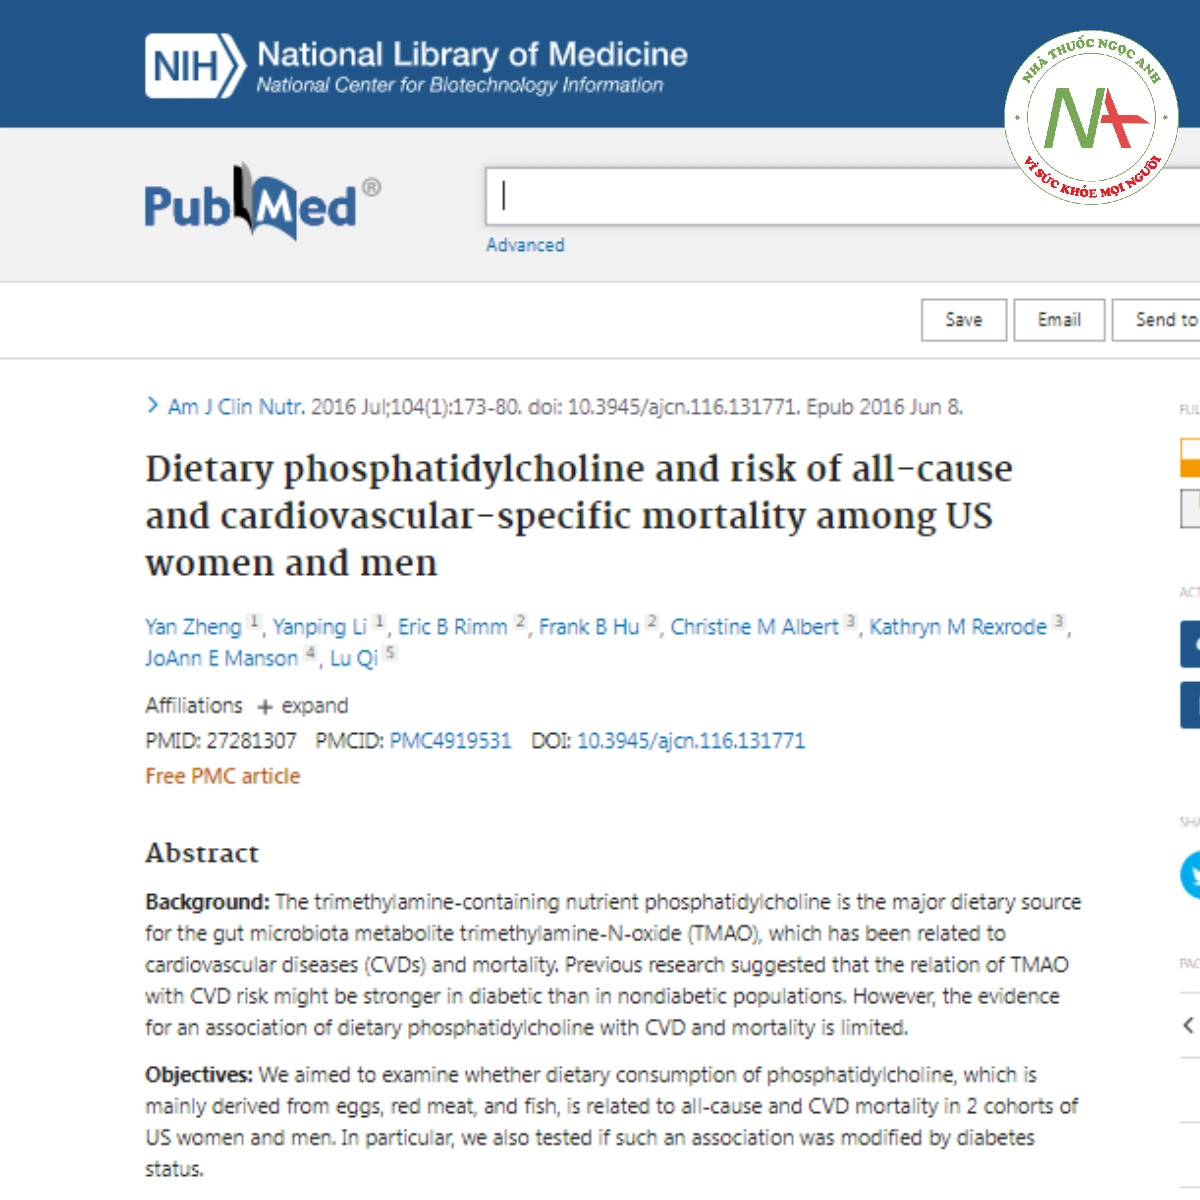 Dietary phosphatidylcholine and risk of all-cause and cardiovascular-specific mortality among US women and men